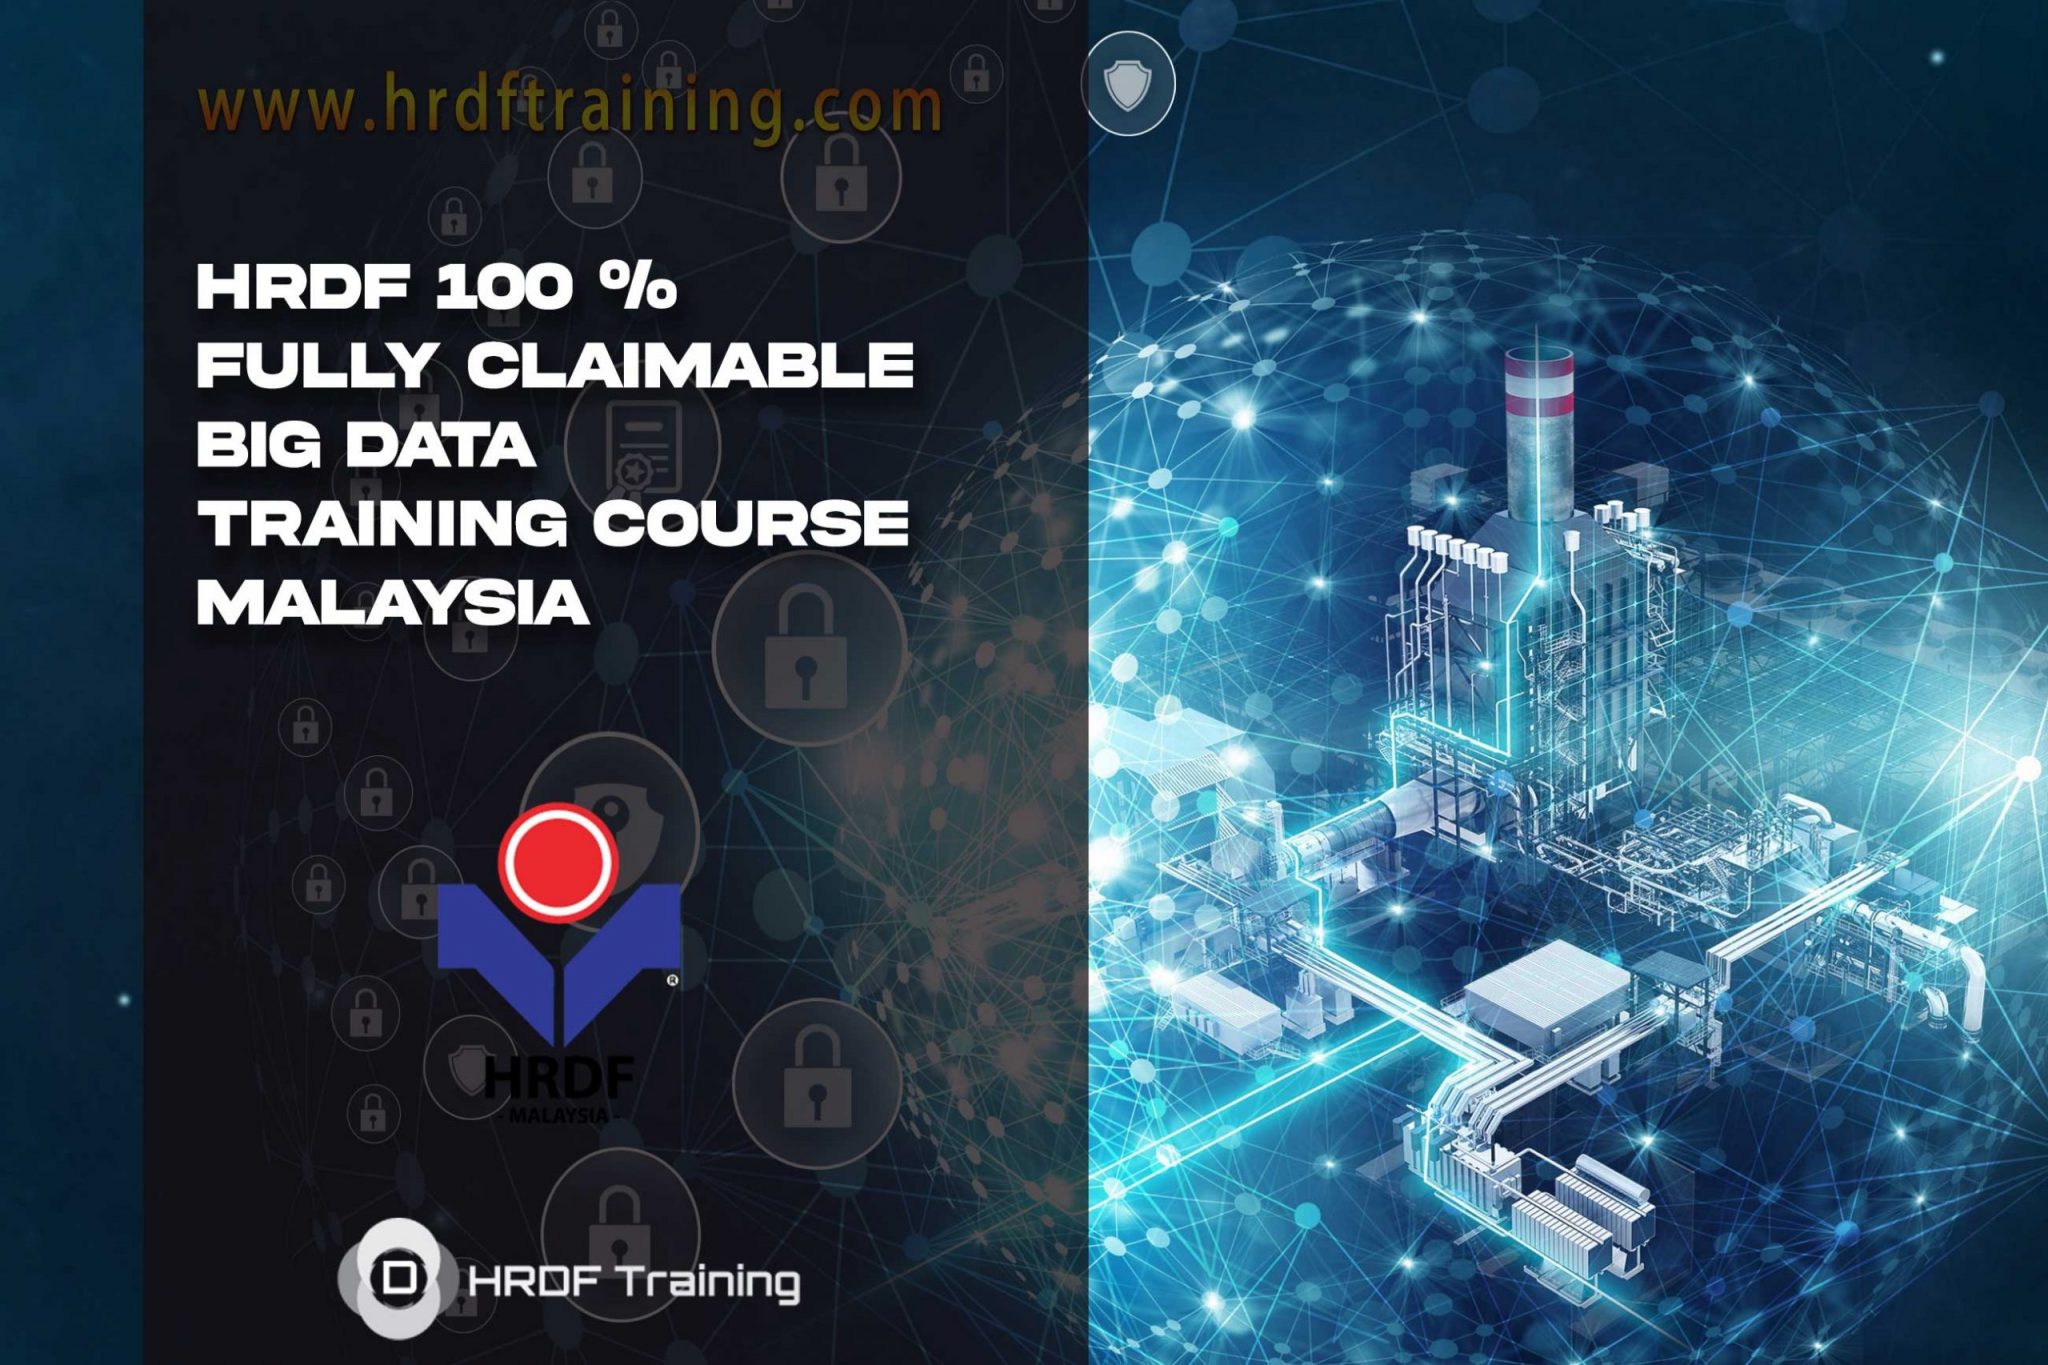 HRDF 100 % Fully Claimable Big Data Training Course